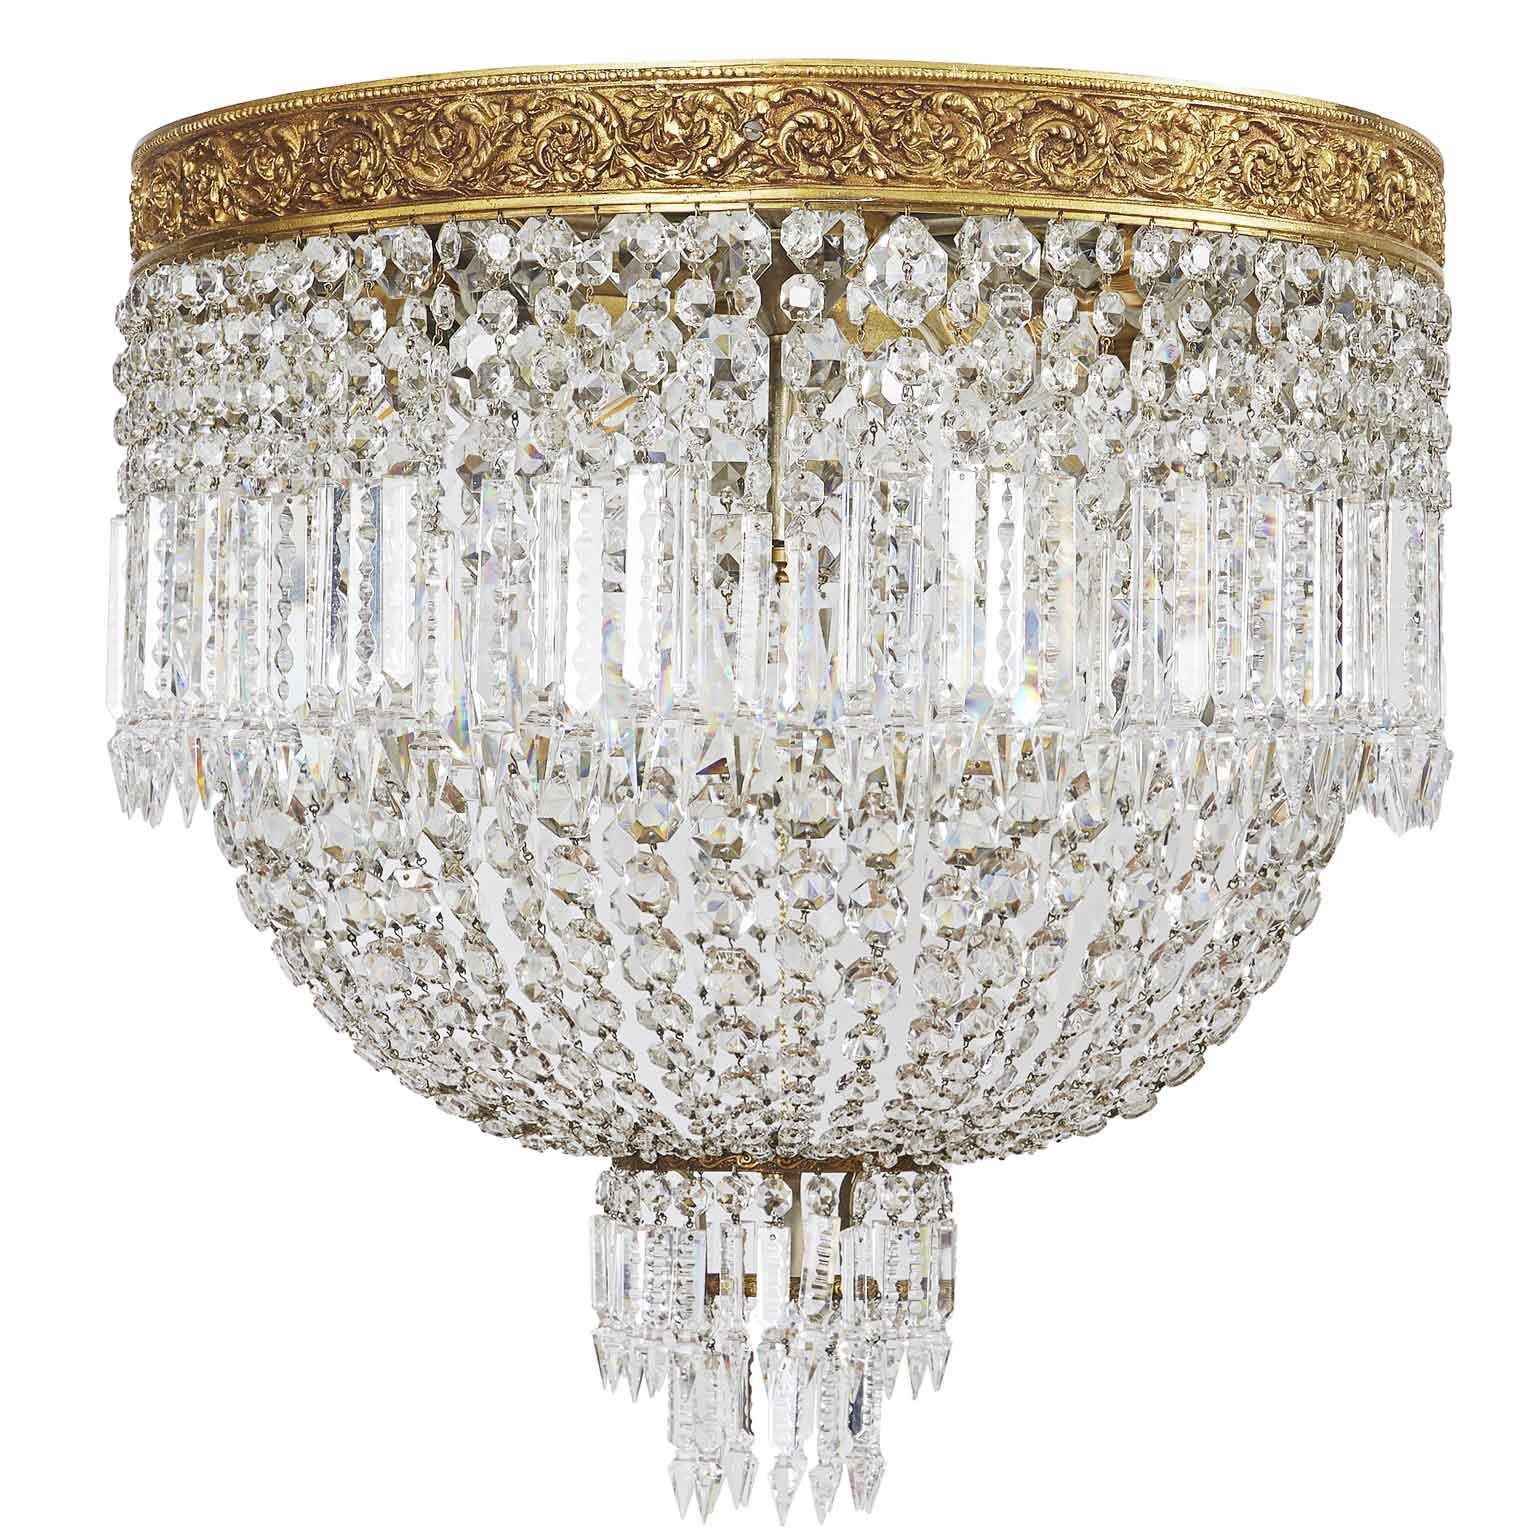 Large Italian circular crystal flush mount, a Neoclassical style ceiling fixture, a timeless circular six-light crystal pendant dating back to circa 1955, coming from an extraordinary elegant villa in Milan, Northern Italy. 
It is in good condition